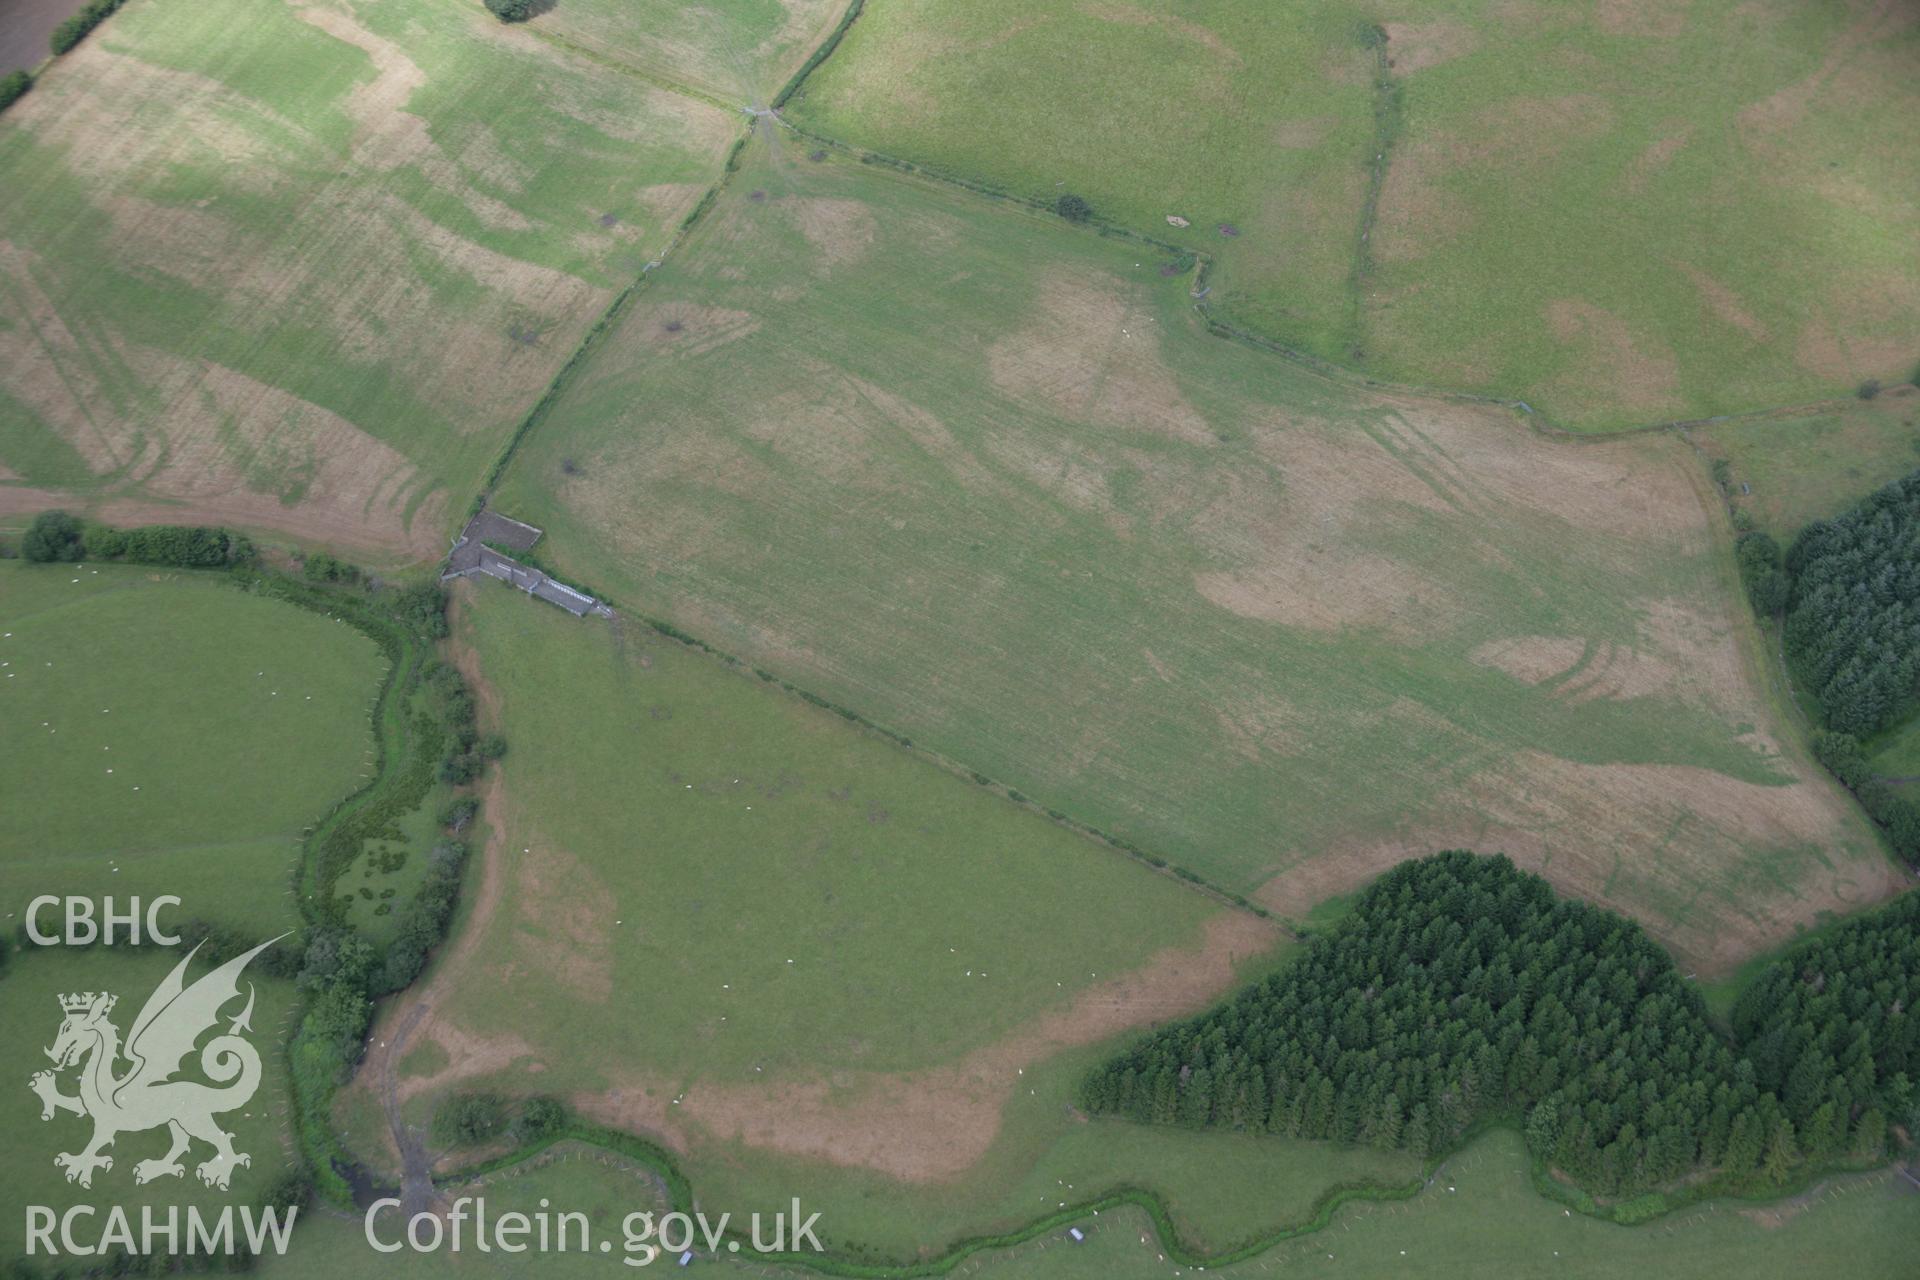 RCAHMW colour oblique aerial photograph of Llanfor Roman Military Complex visible in cropmarks, viewed from the south-east. Taken on 31 July 2006 by Toby Driver.